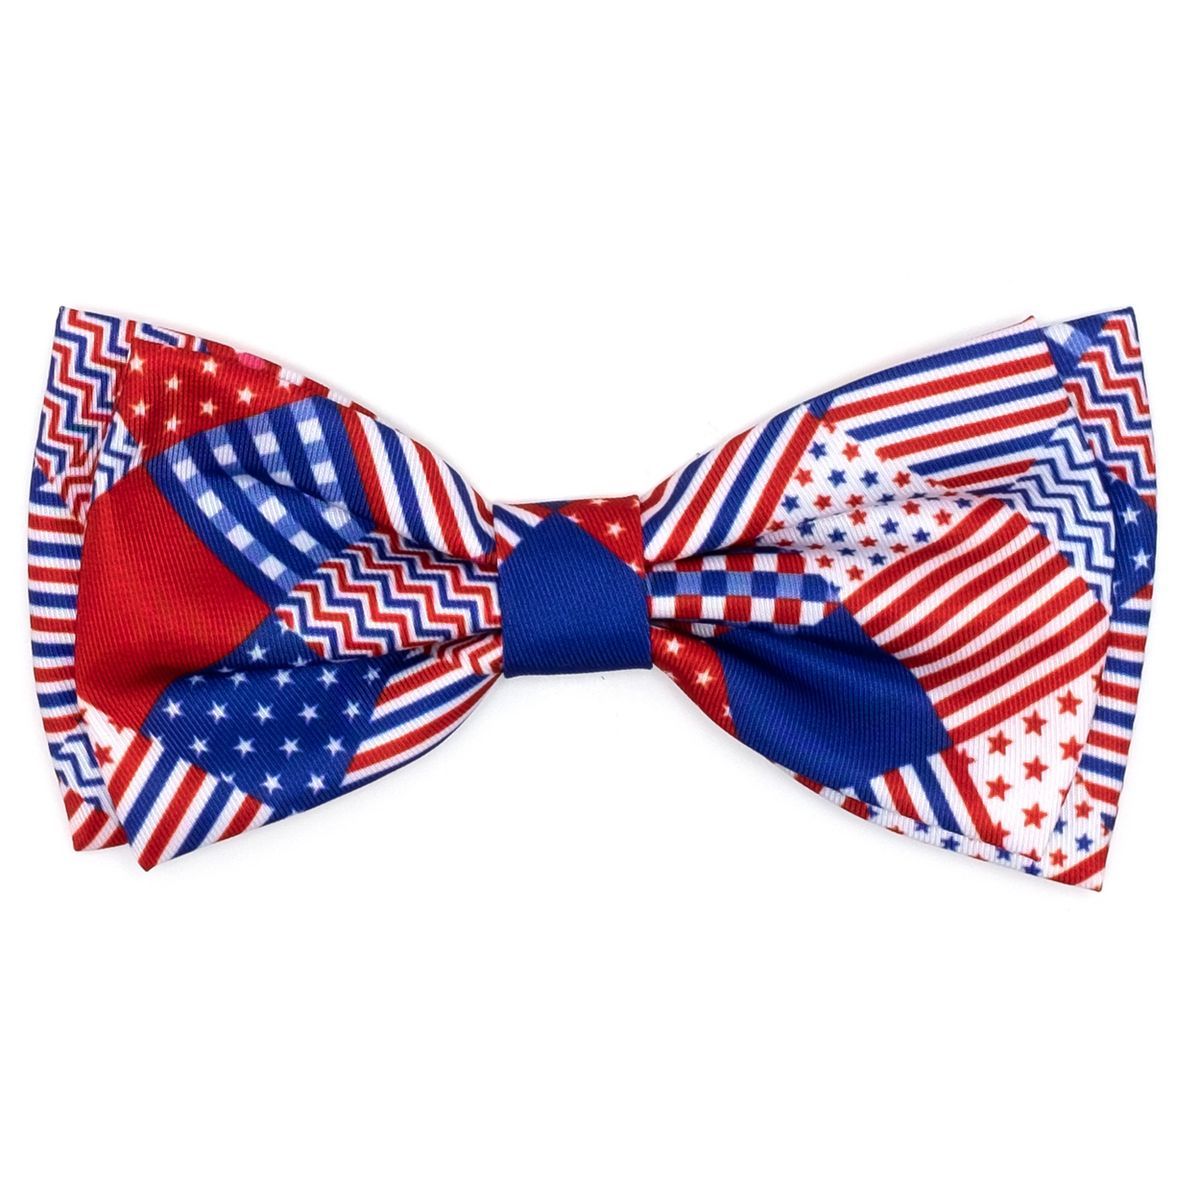 The Worthy Dog Americana Bow Tie Adjustable Collar Attachment Accessory | Target